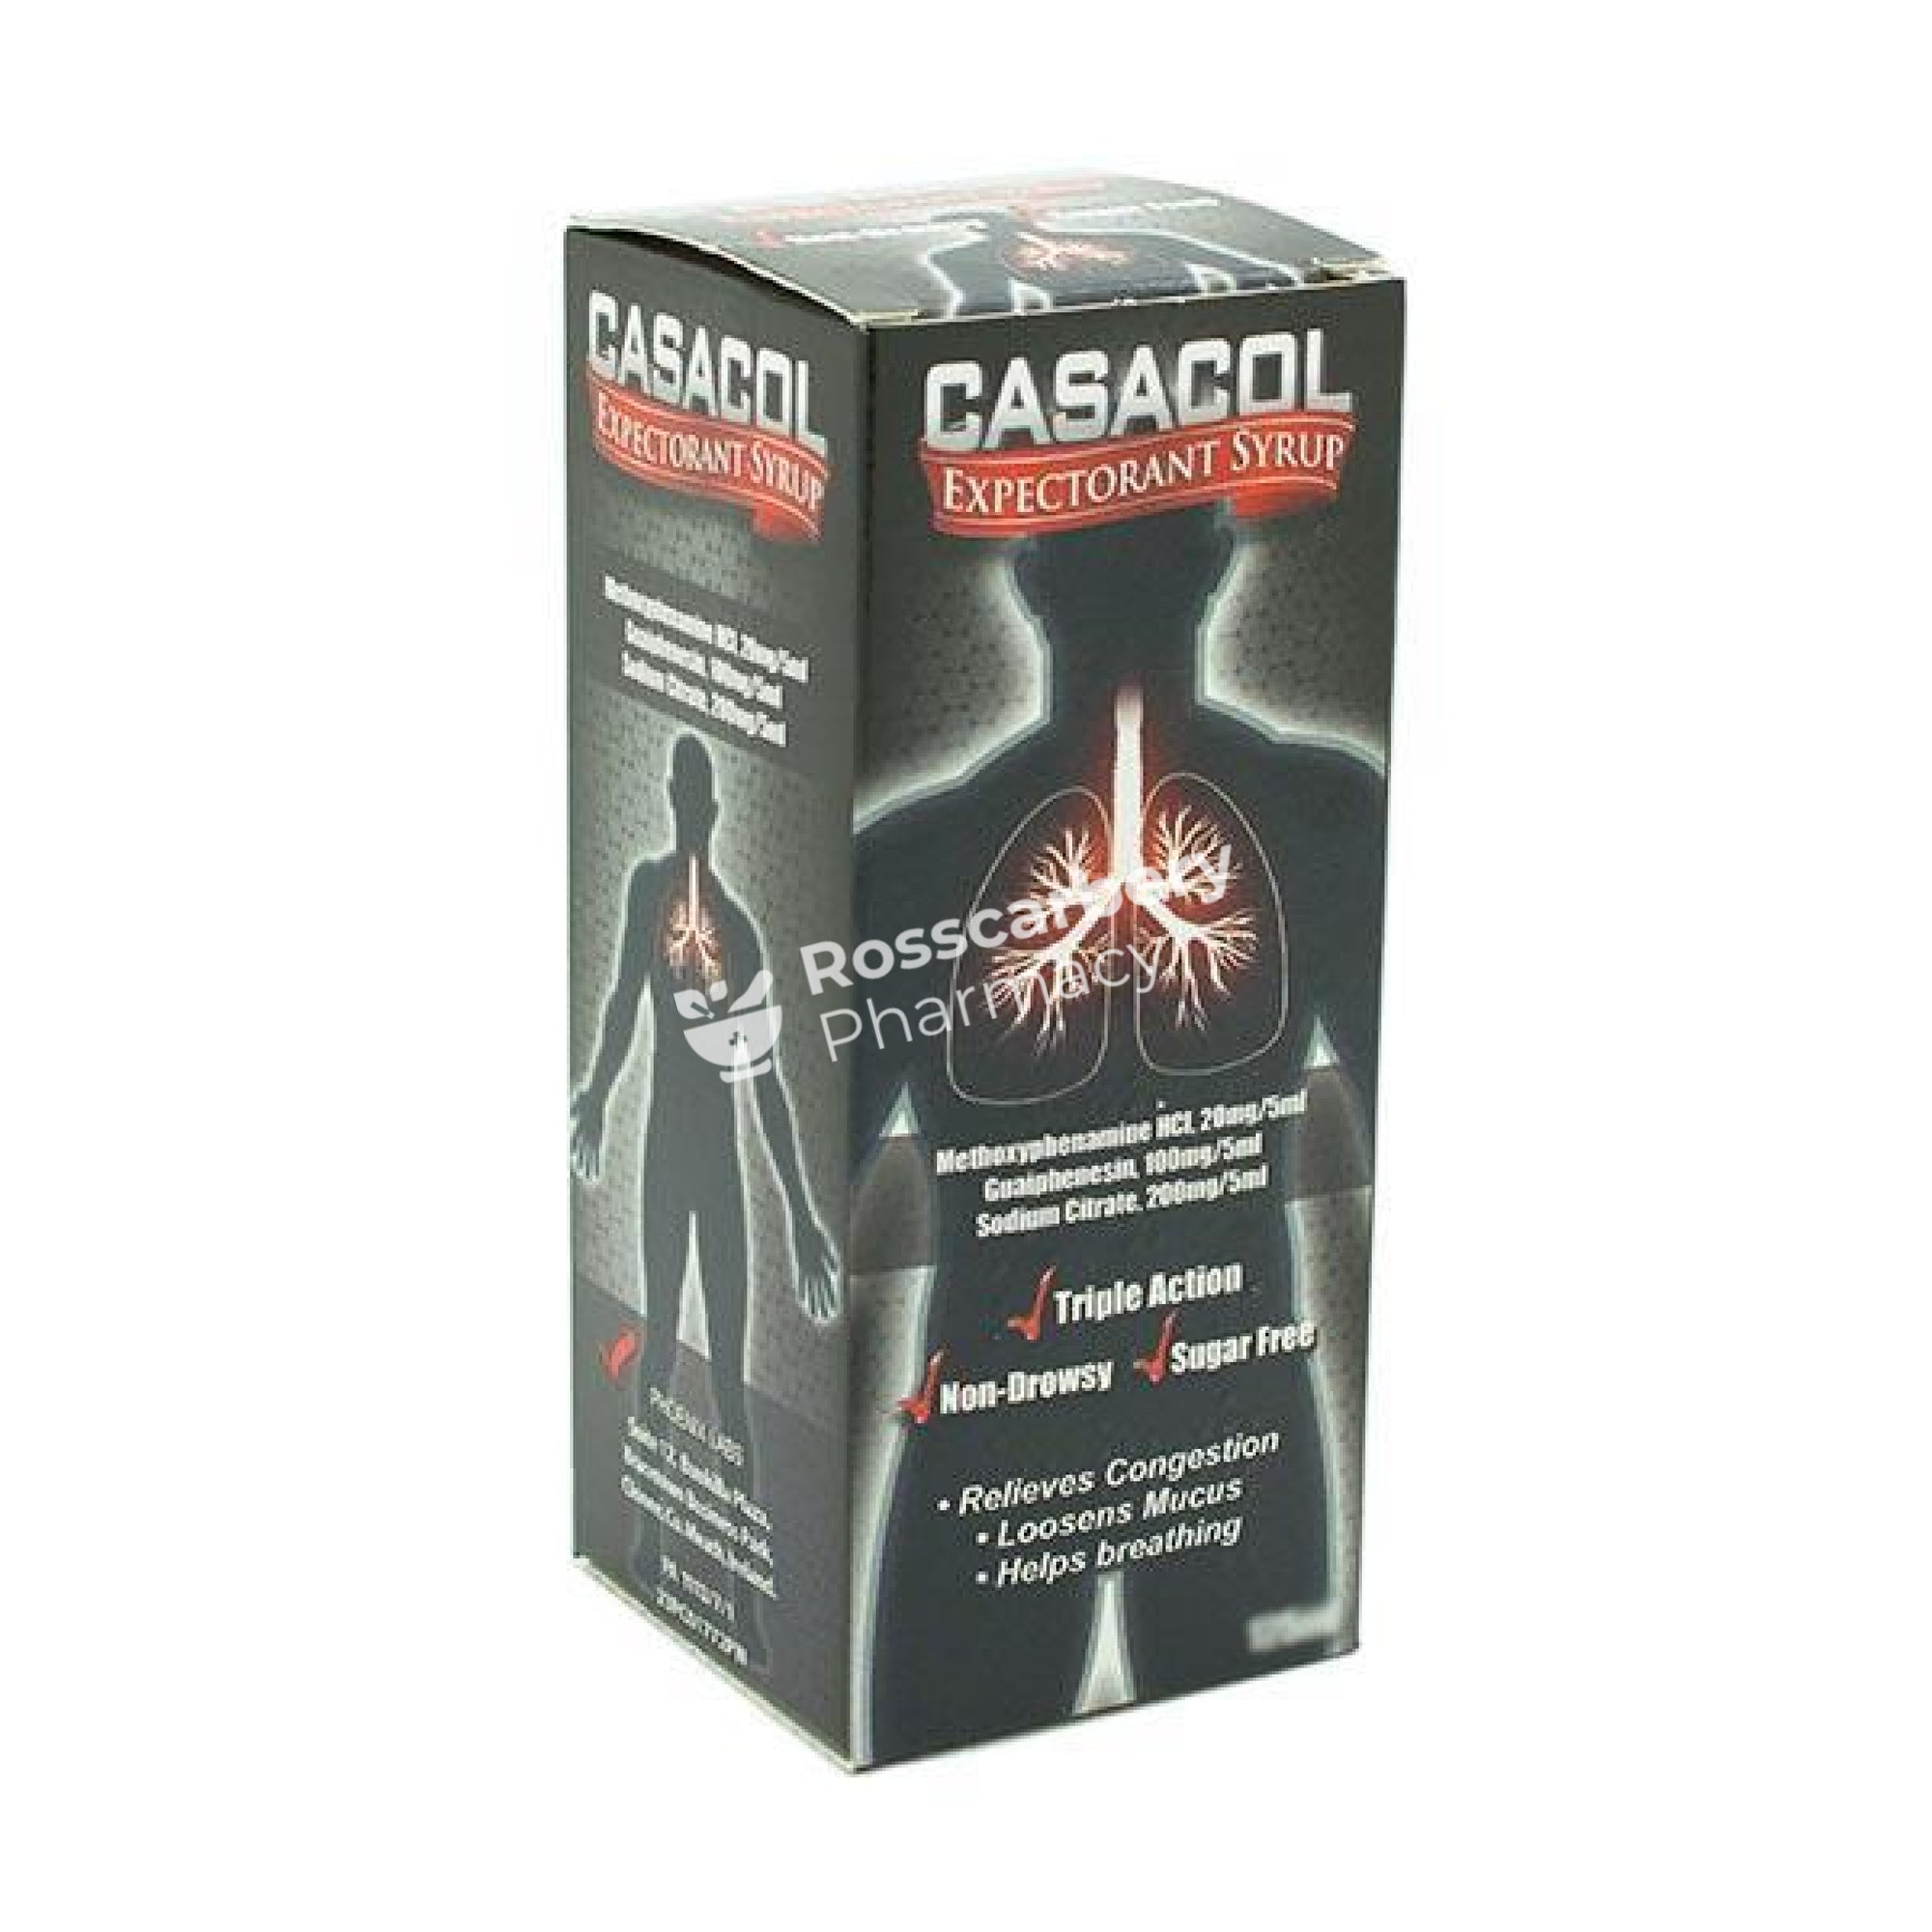 Casacol Expectorant Syrup Cough Bottles